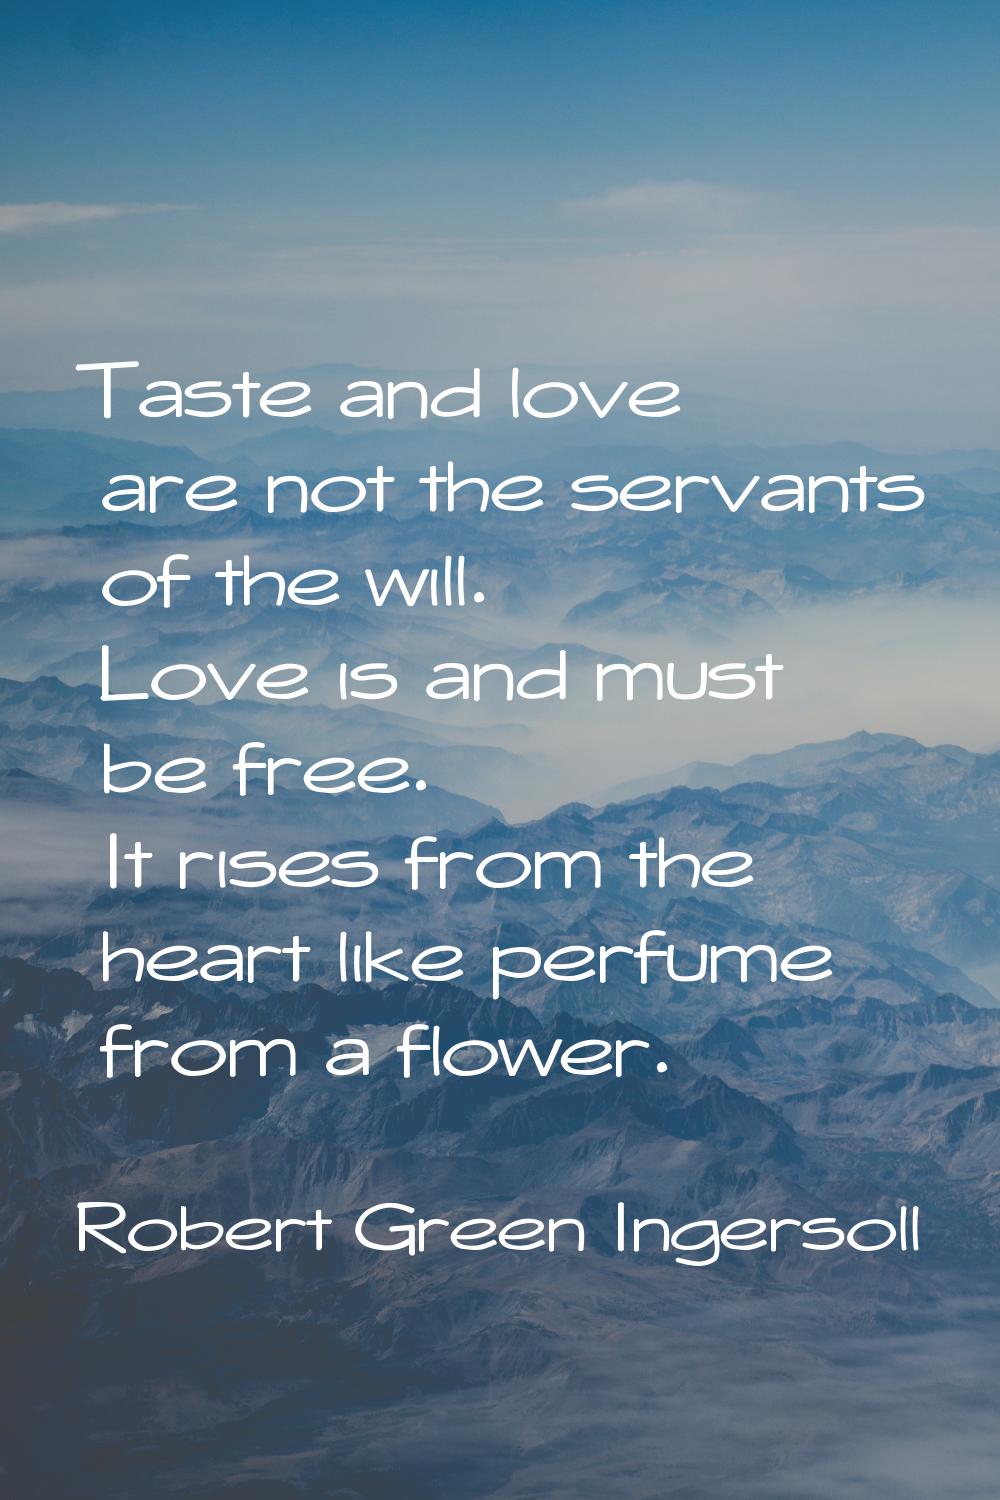 Taste and love are not the servants of the will. Love is and must be free. It rises from the heart 